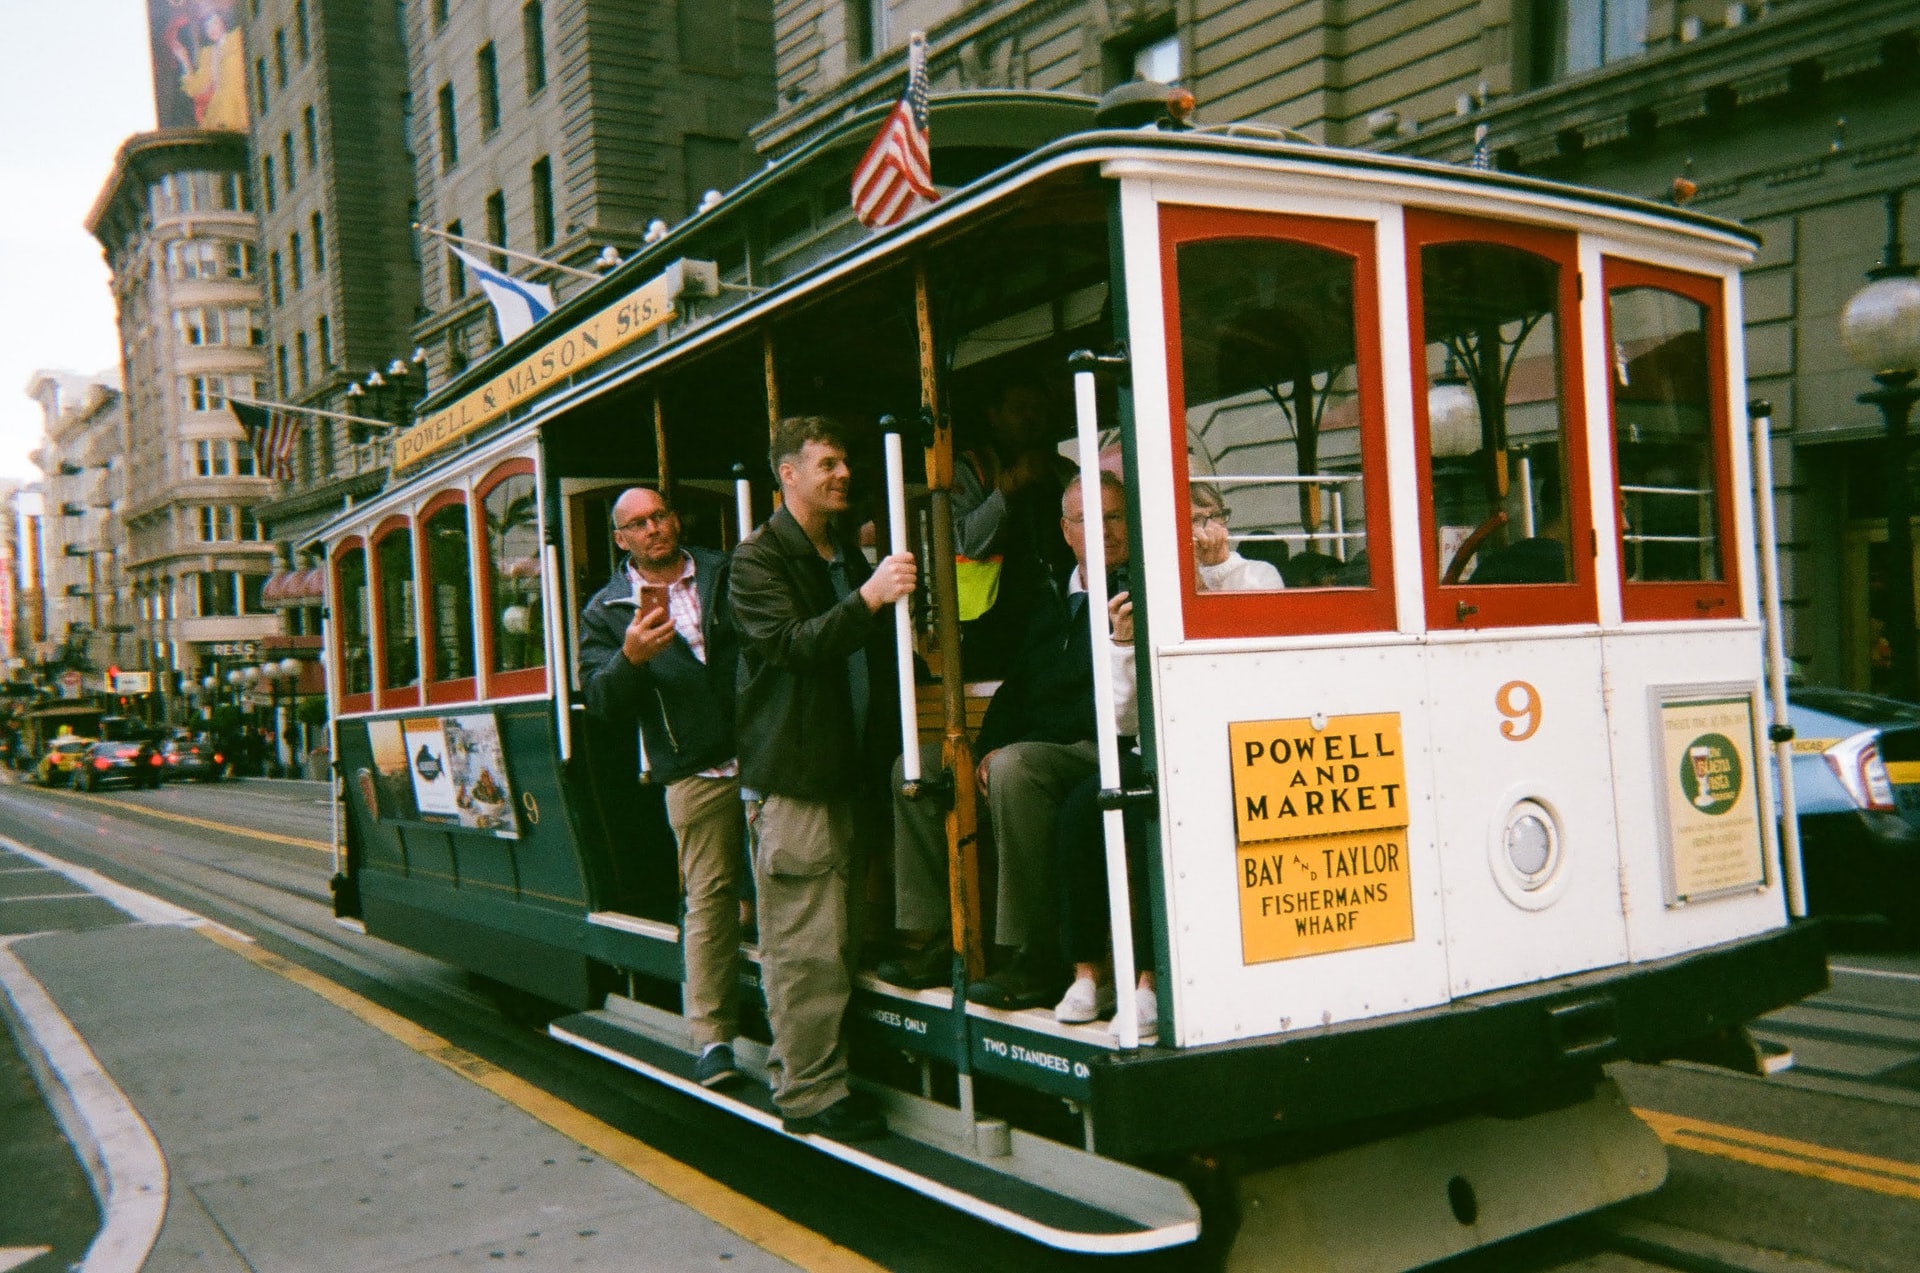 San Francisco Cable Car City Trolley Tour from Union Square 2023